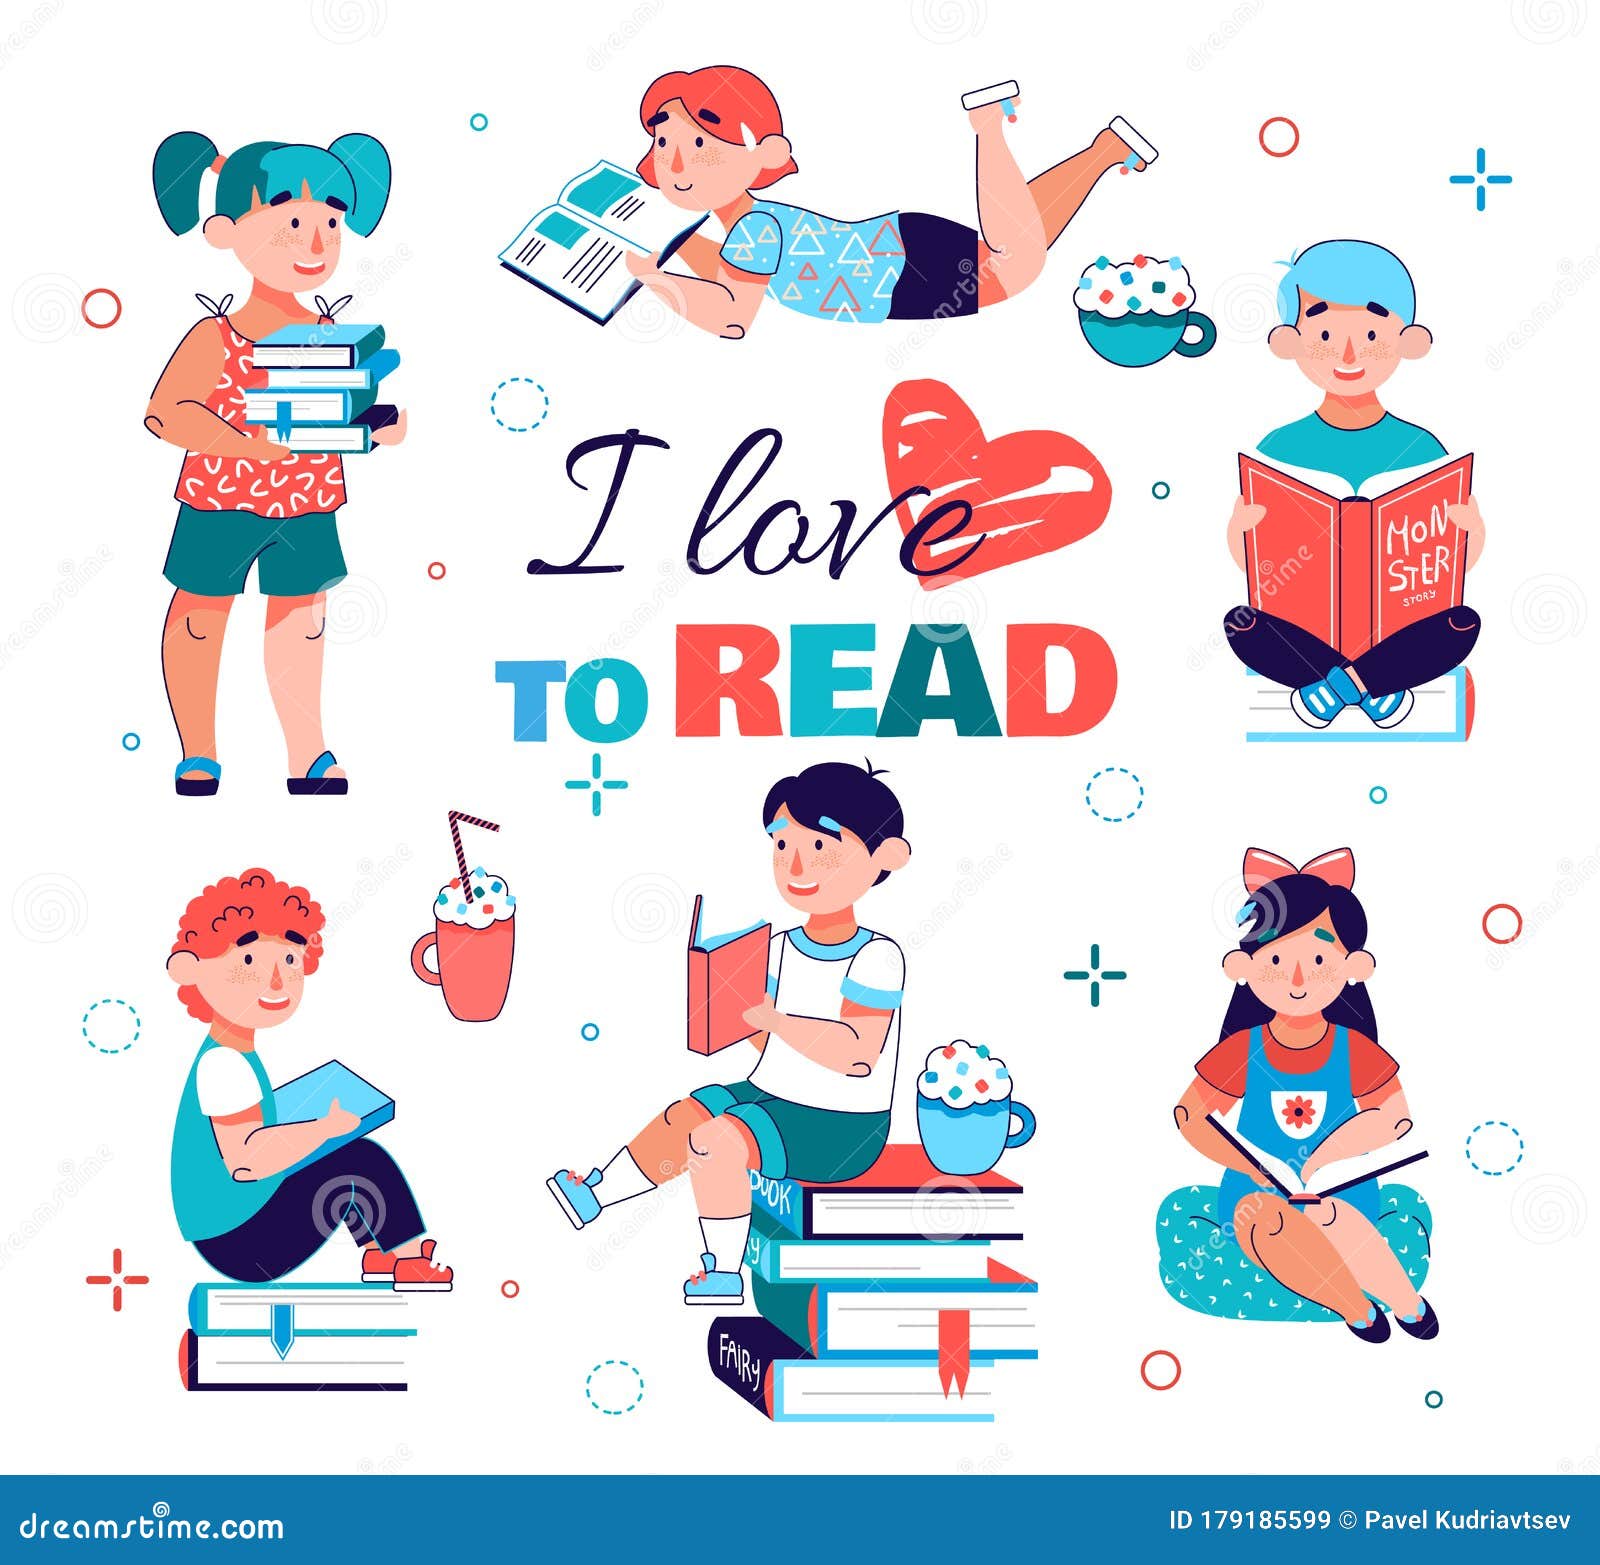 I Love To Read - Children Education Poster with Cartoon Kids Reading Books  Stock Vector - Illustration of leisure, flat: 179185599